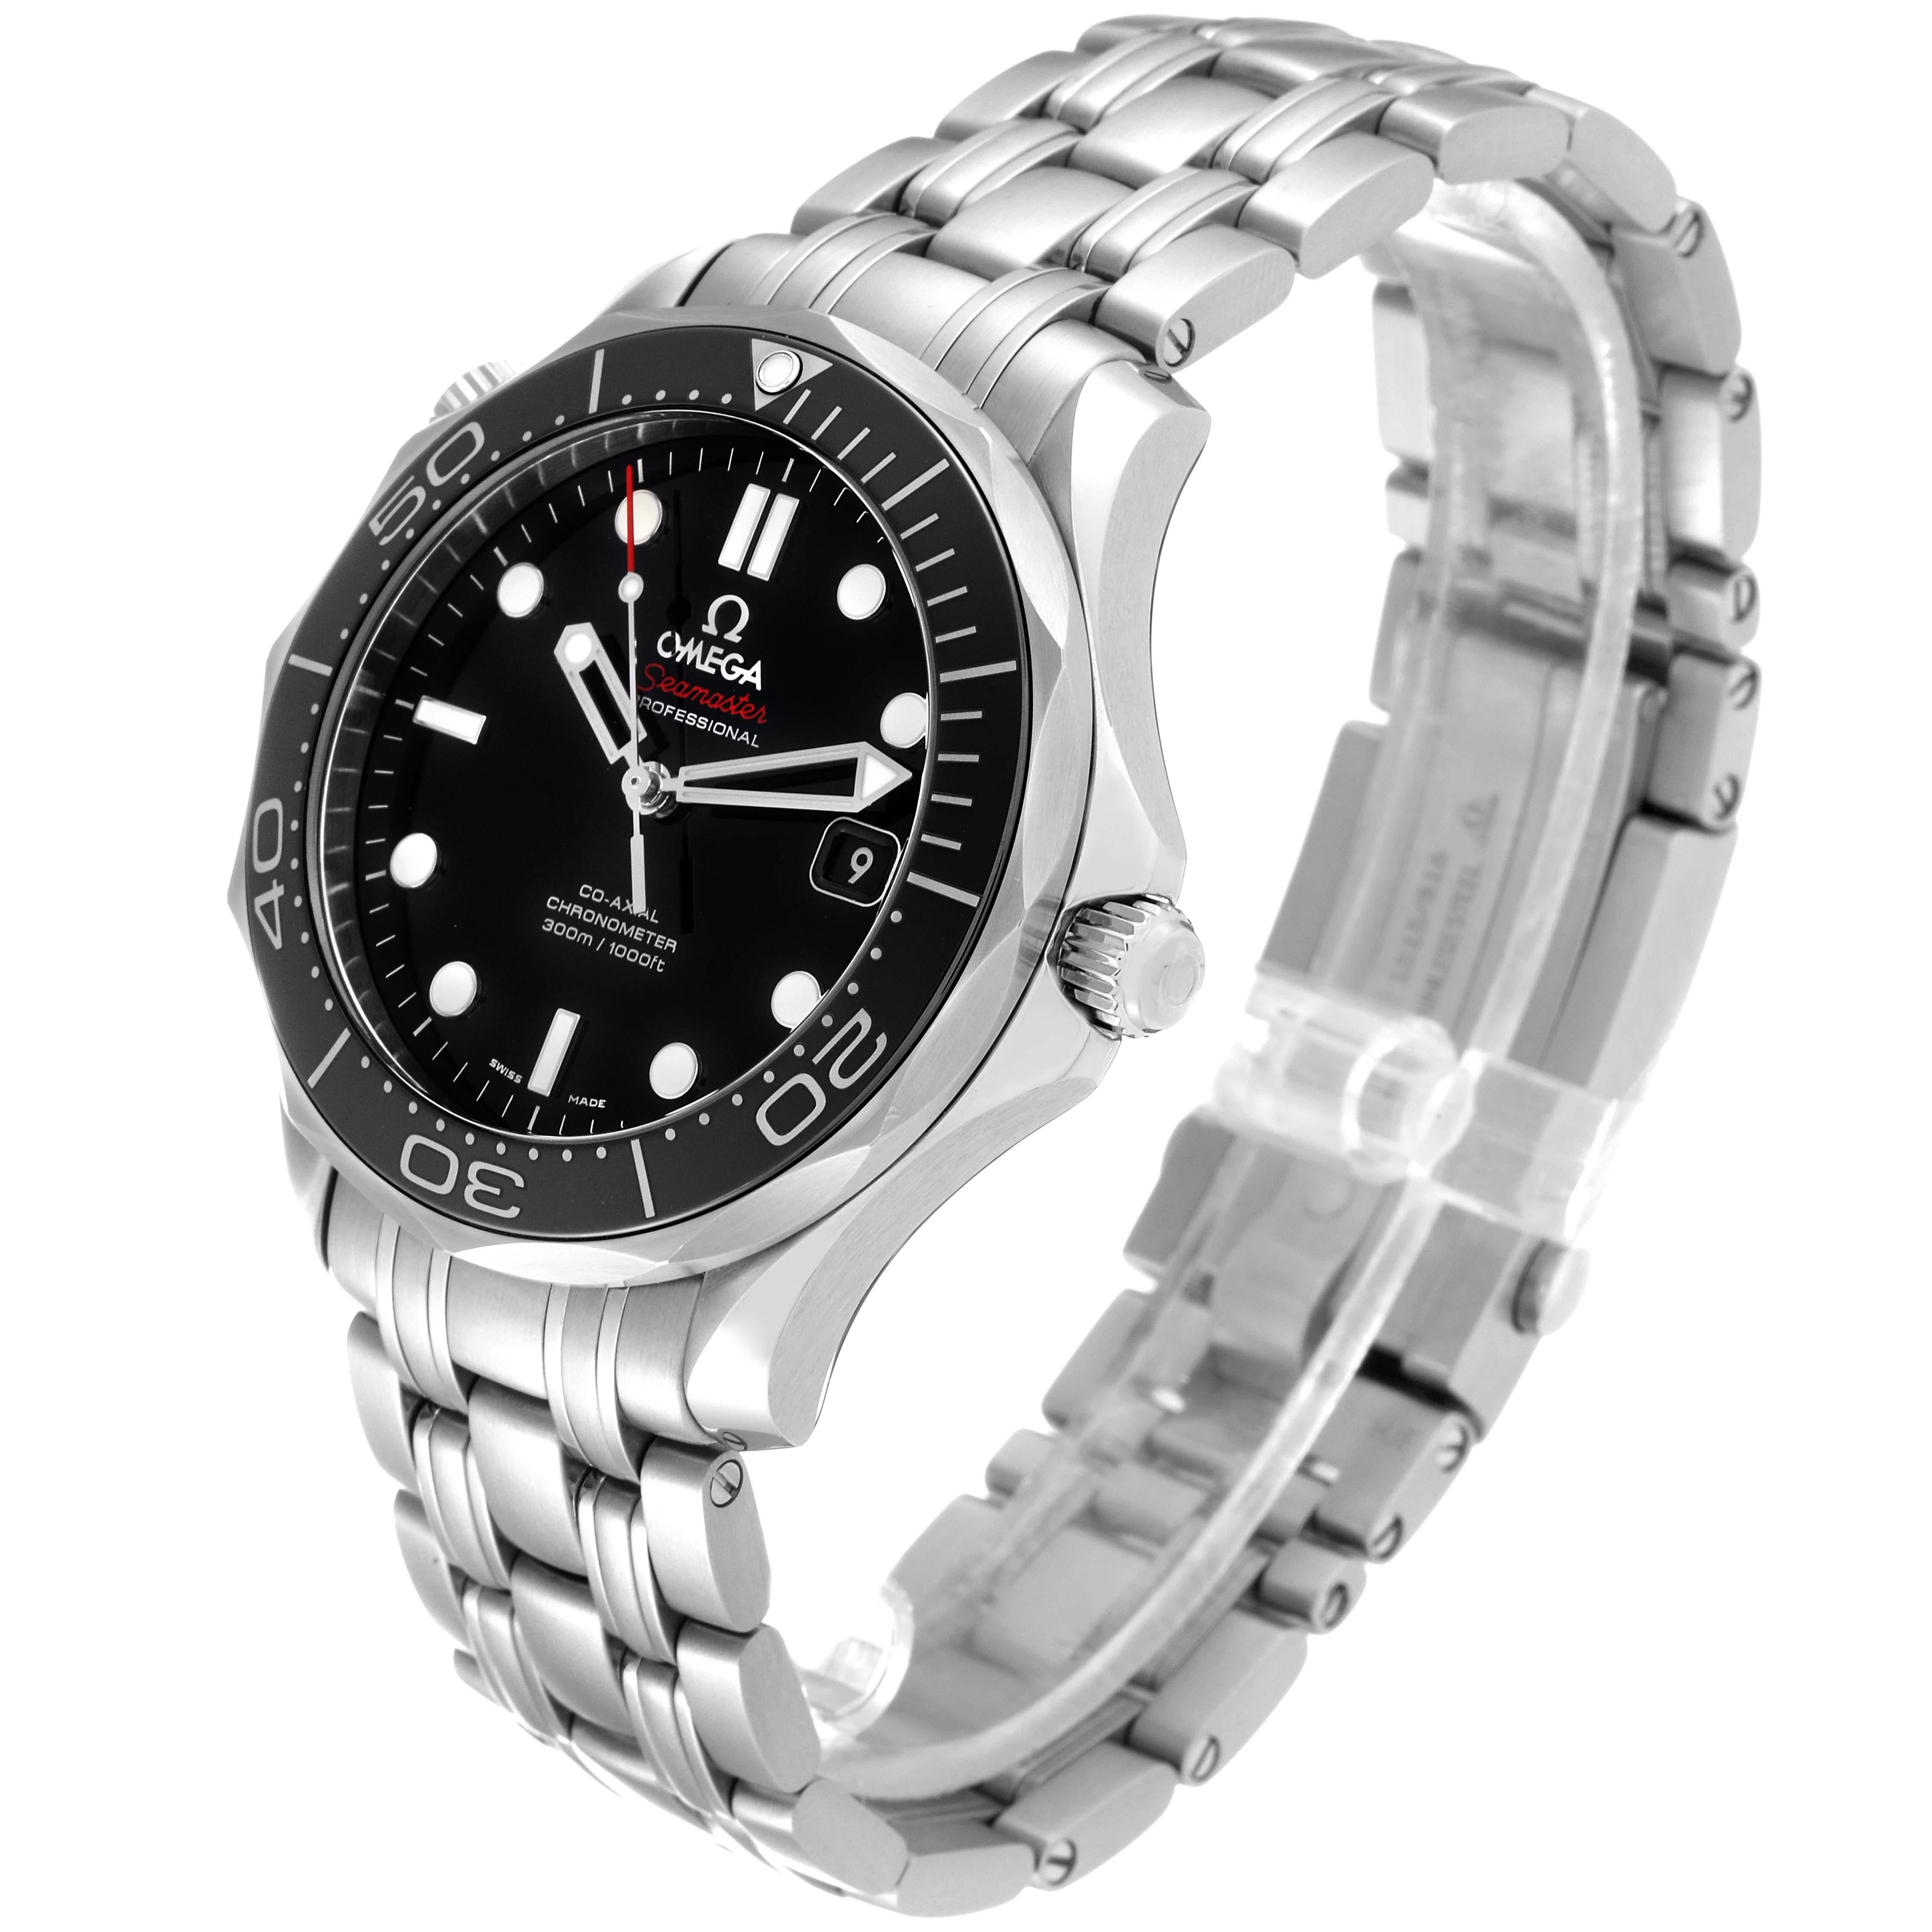 Omega Seamaster Diver 300M Steel Mens Watch 212.30.41.20.01.003 Box Card For Sale 1